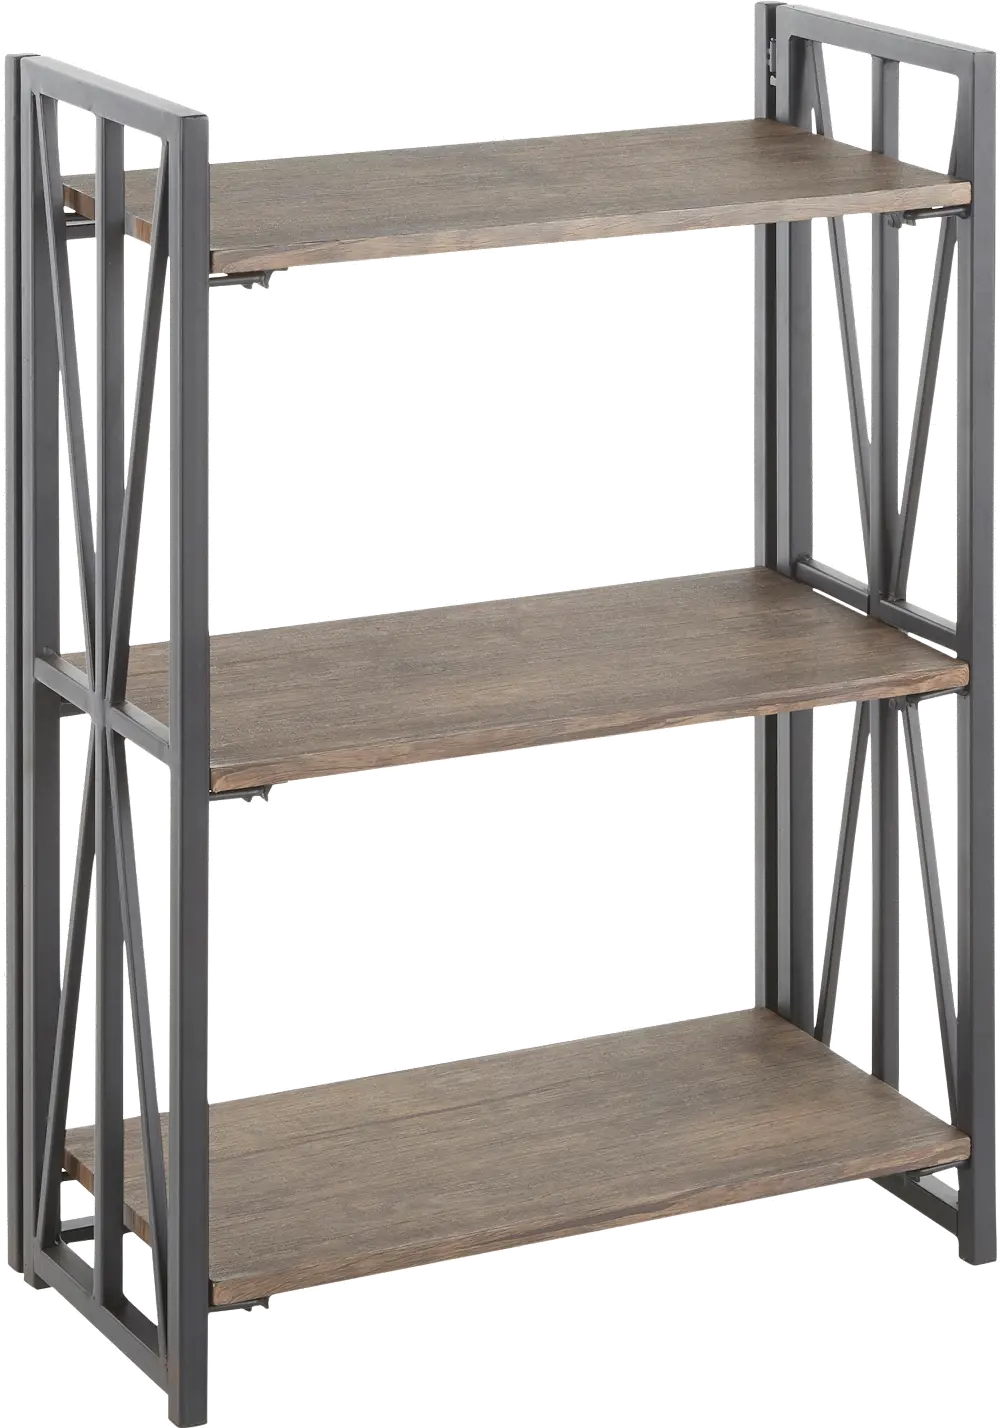 OBC-INDY BKBN Industrial Black and Brown Bookcase - Indy-1